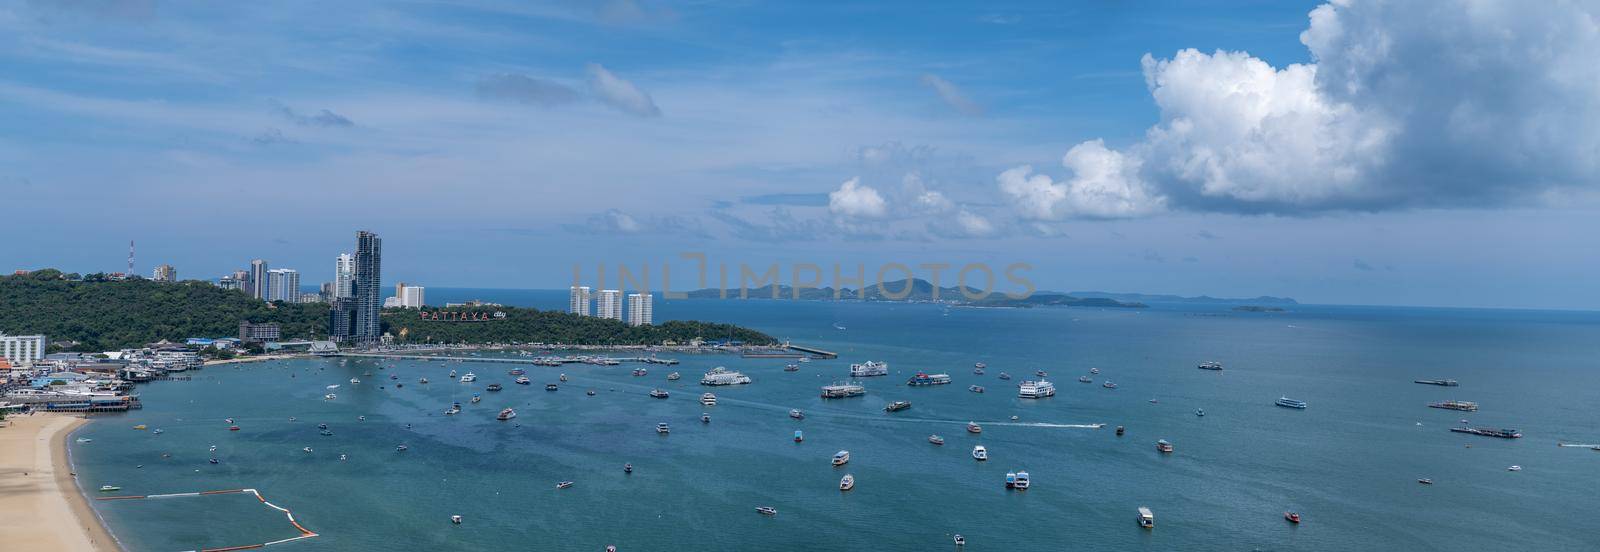 Aerial view of Pattaya city alphabet on the mountain, Pattaya, panoramic view over the skyline of Pattaya city Thailand Asia citiyscape